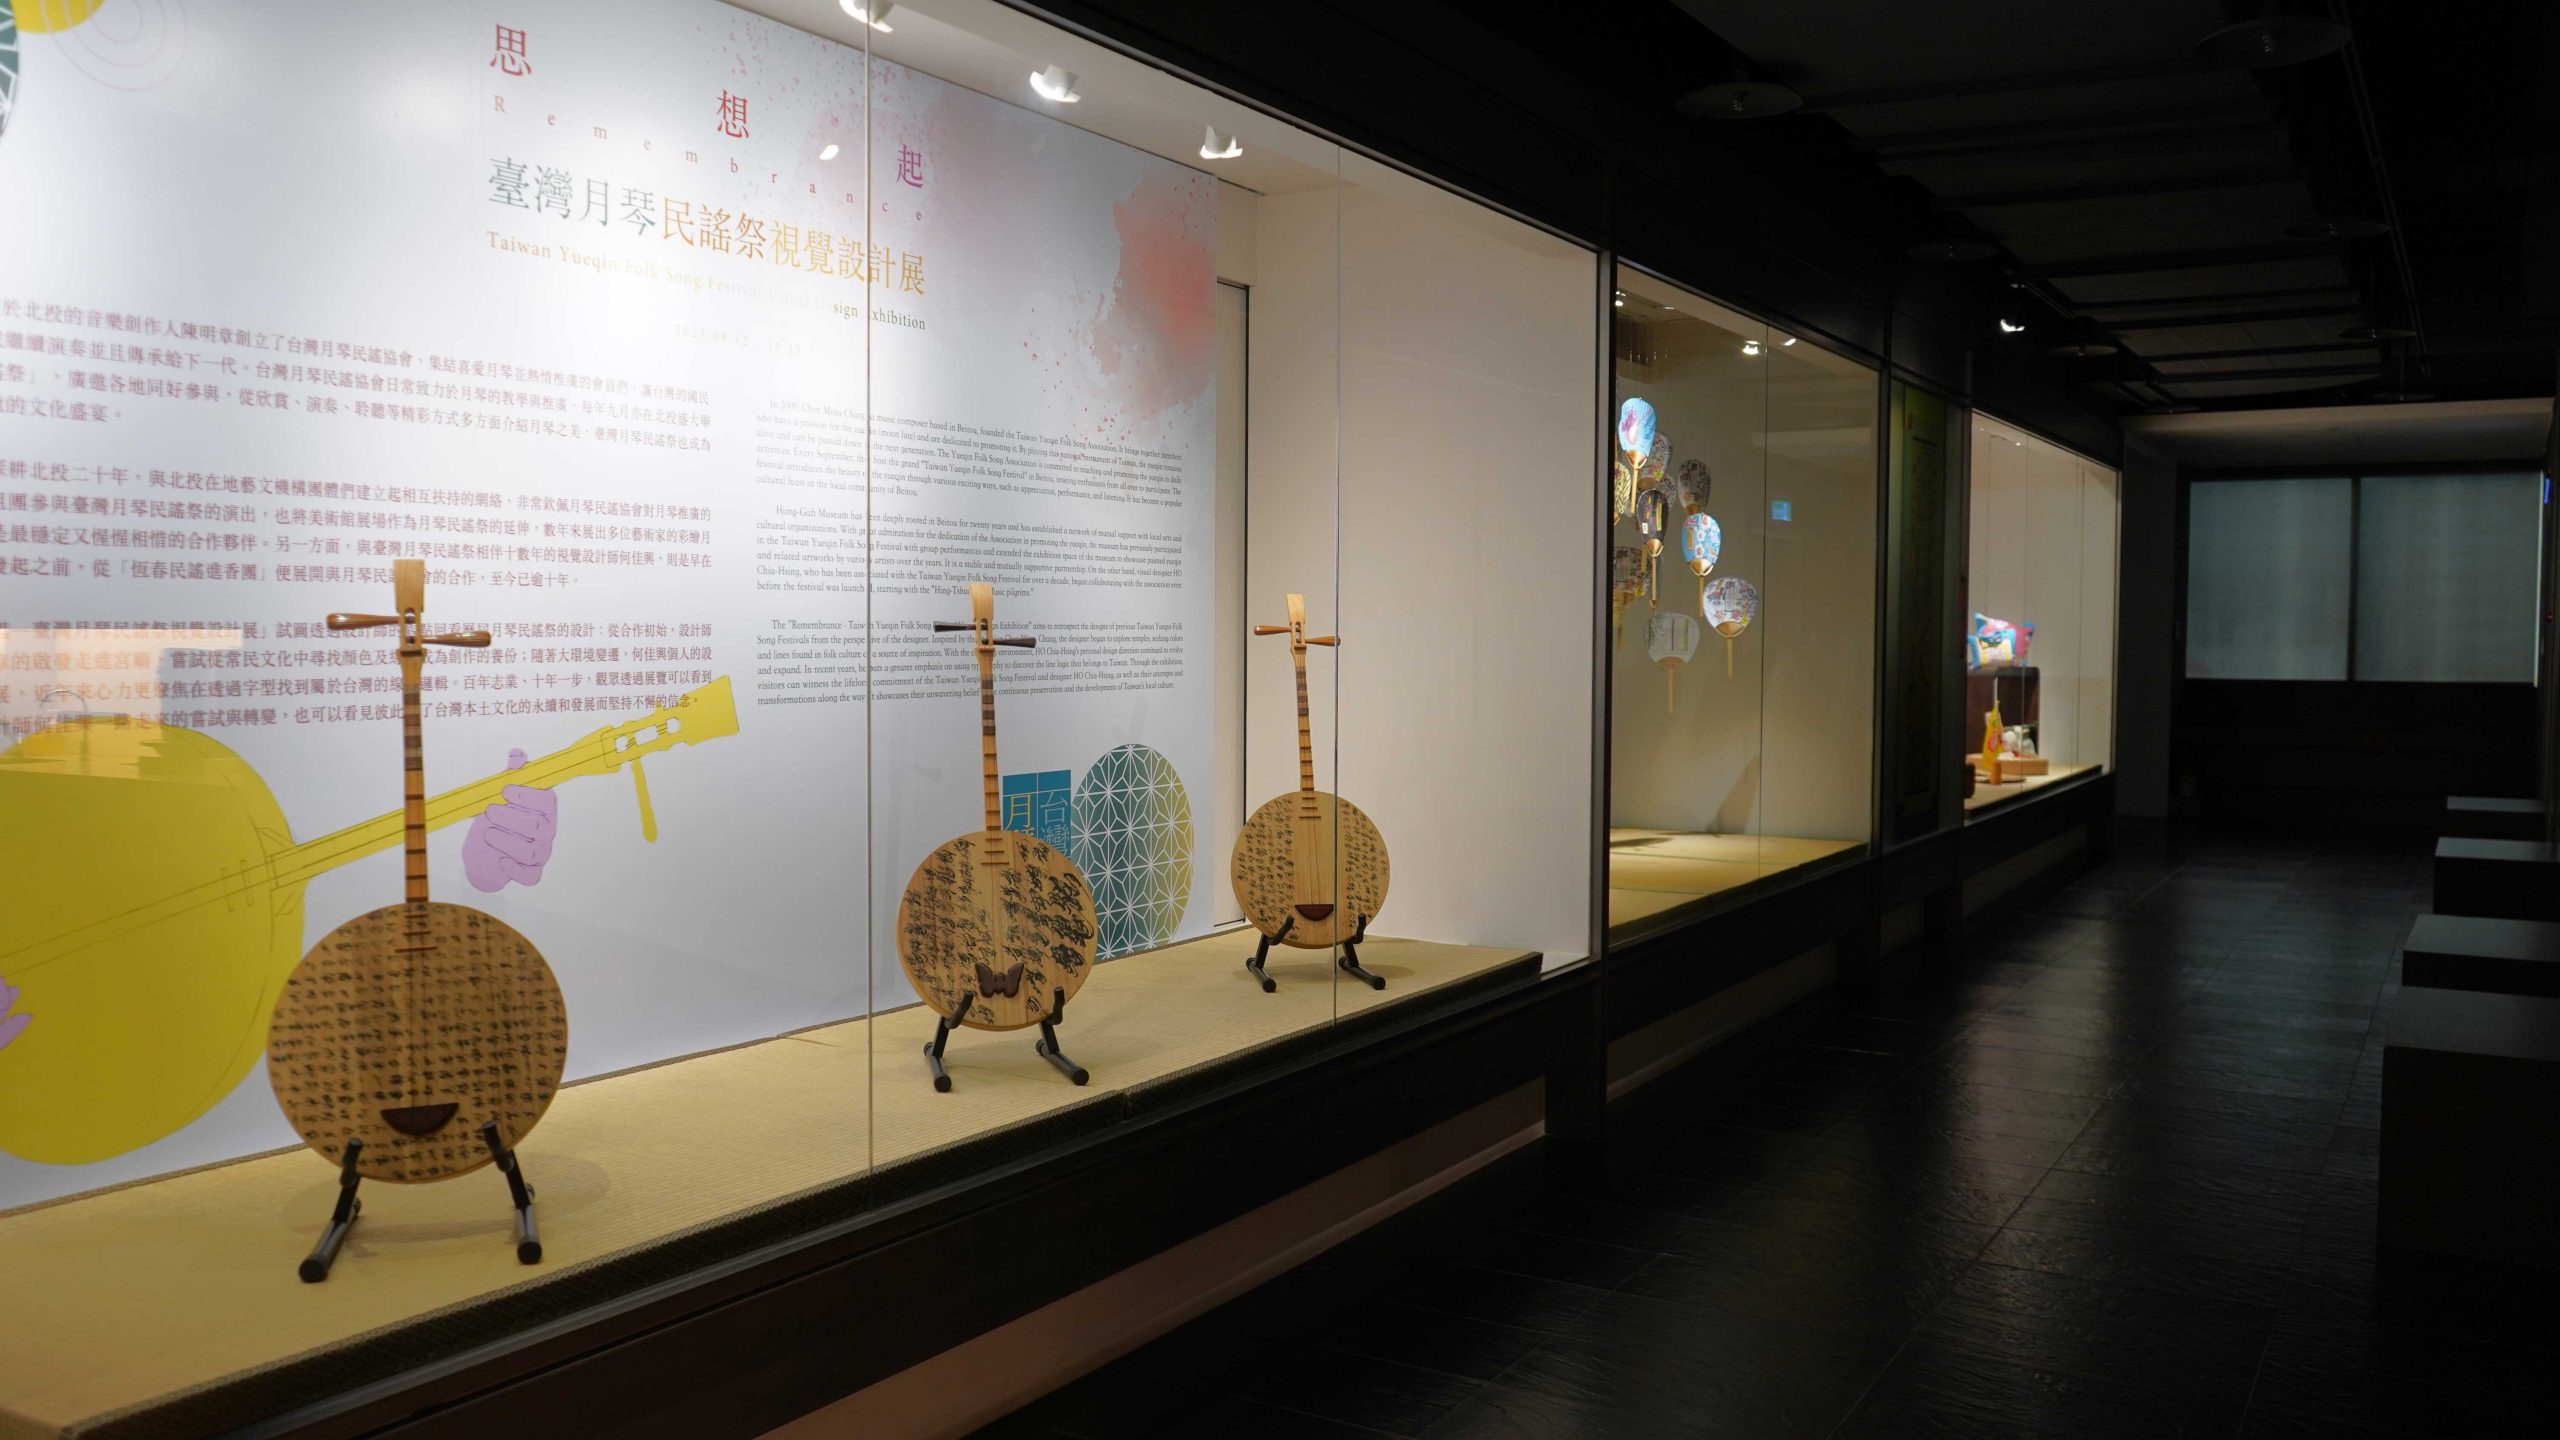 Remembrance: Taiwan Yueqin Folk Song Festival Visual Design Exhibition